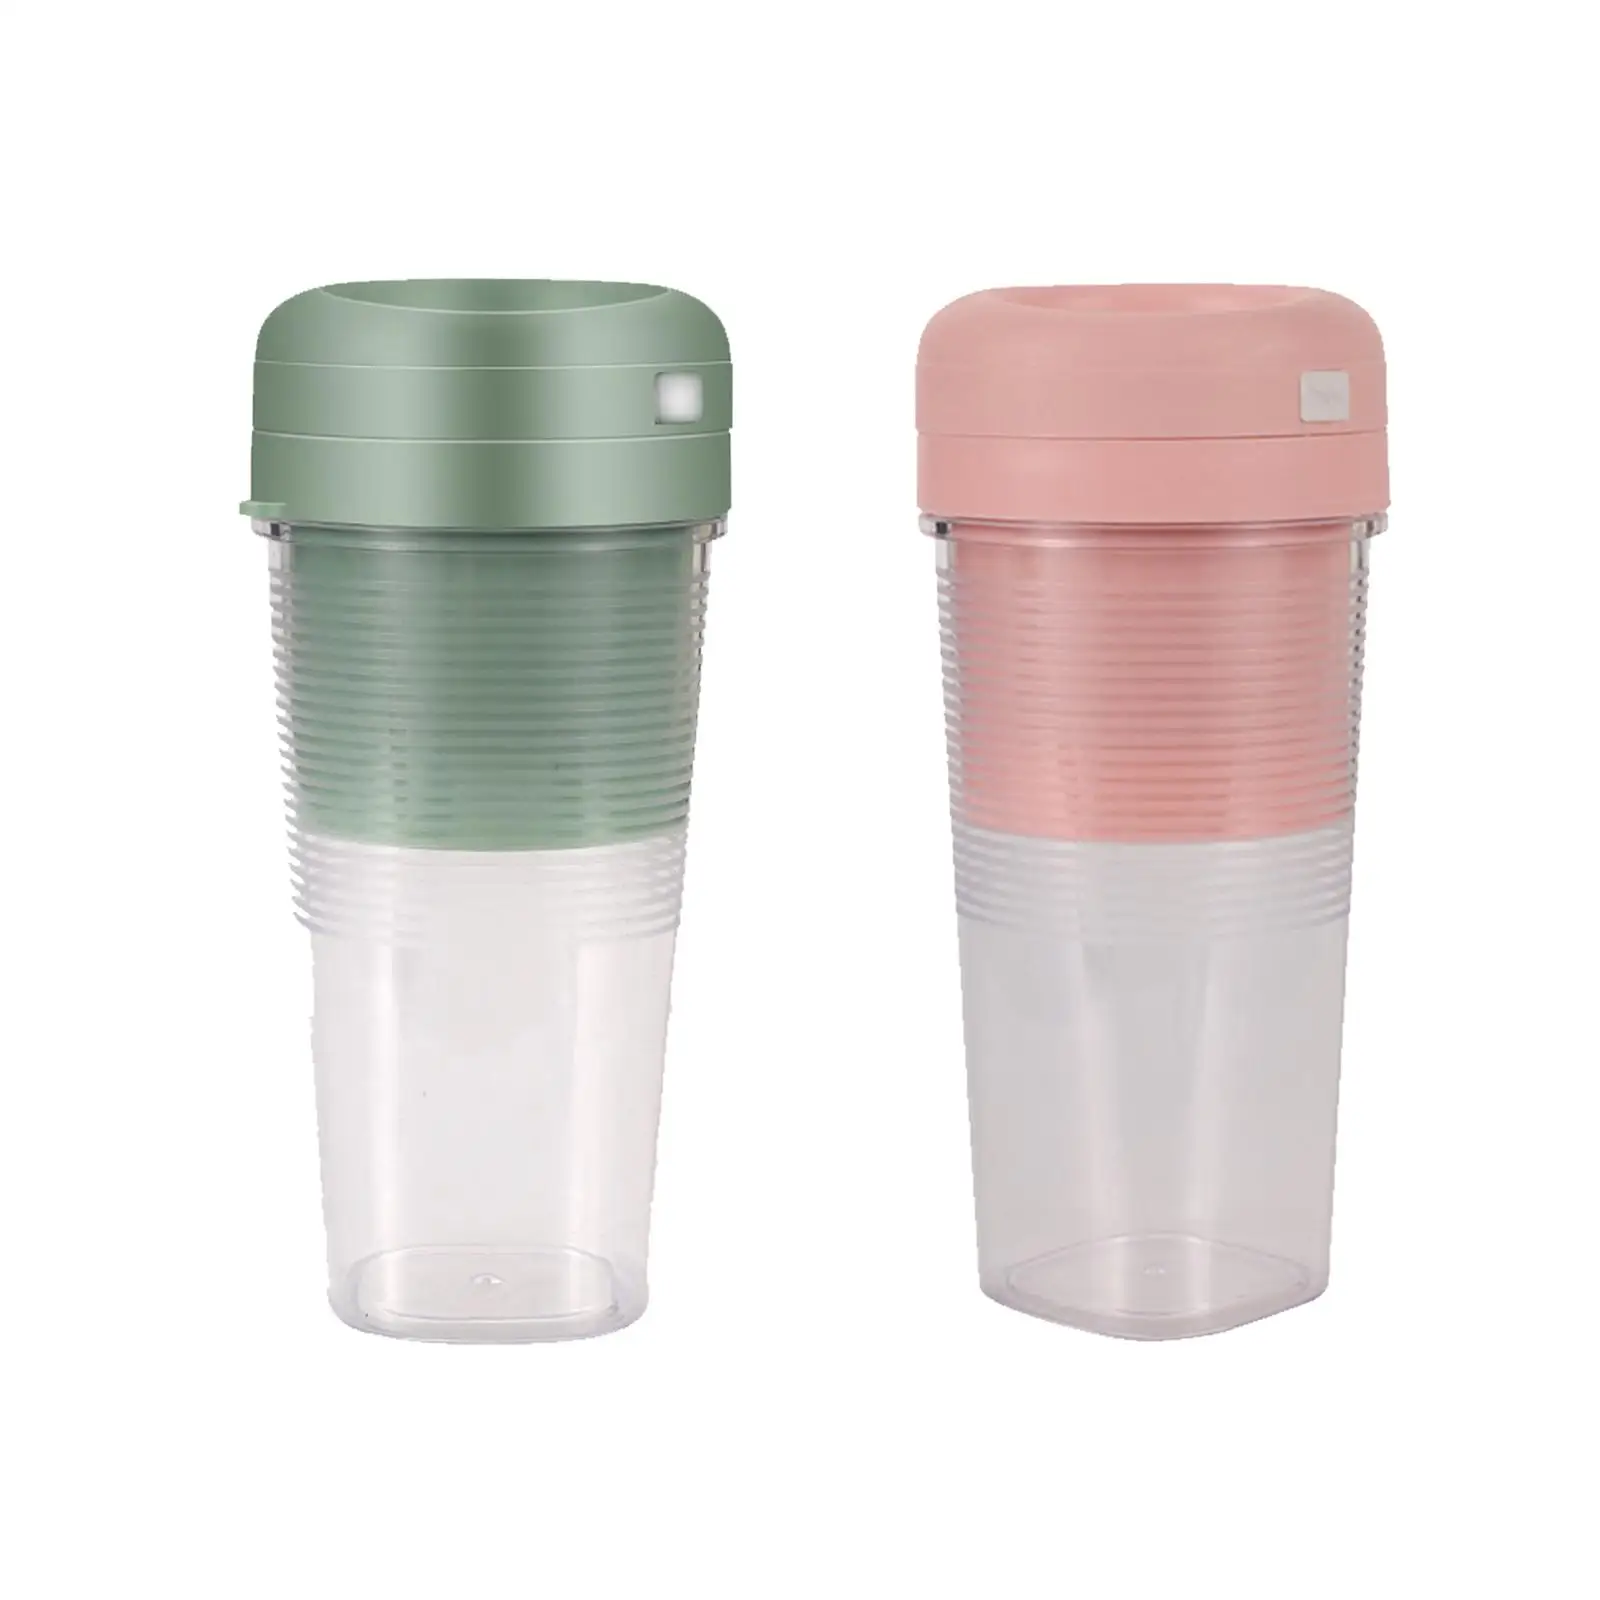 Mini Juicer for Shakes and Smoothies Personal Size Home Jucie Fruit Blender Multifunction Juice Mixing Cup for Outdoor Travel